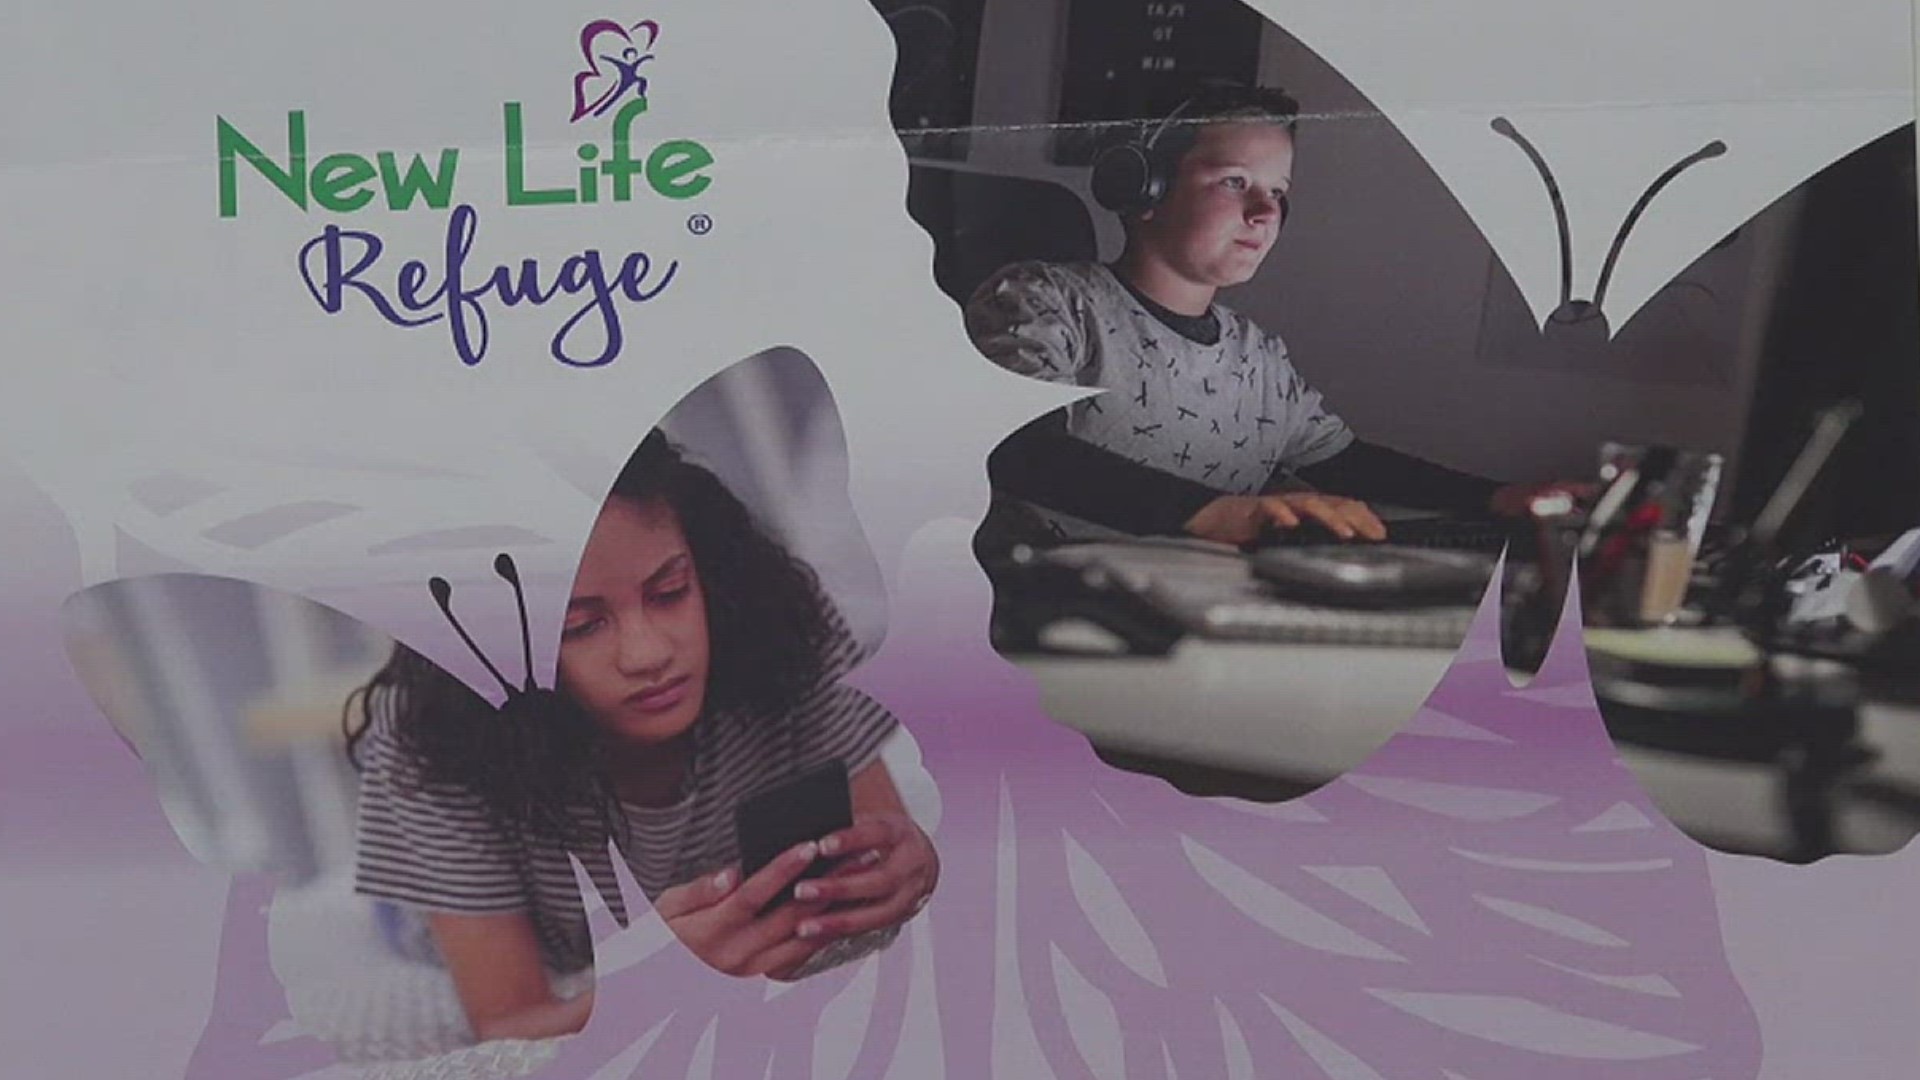 New Life Refuge Ministries and CASA of the Coastal Bend are just two of many local organizations that offer services to children involved in sex trafficking.